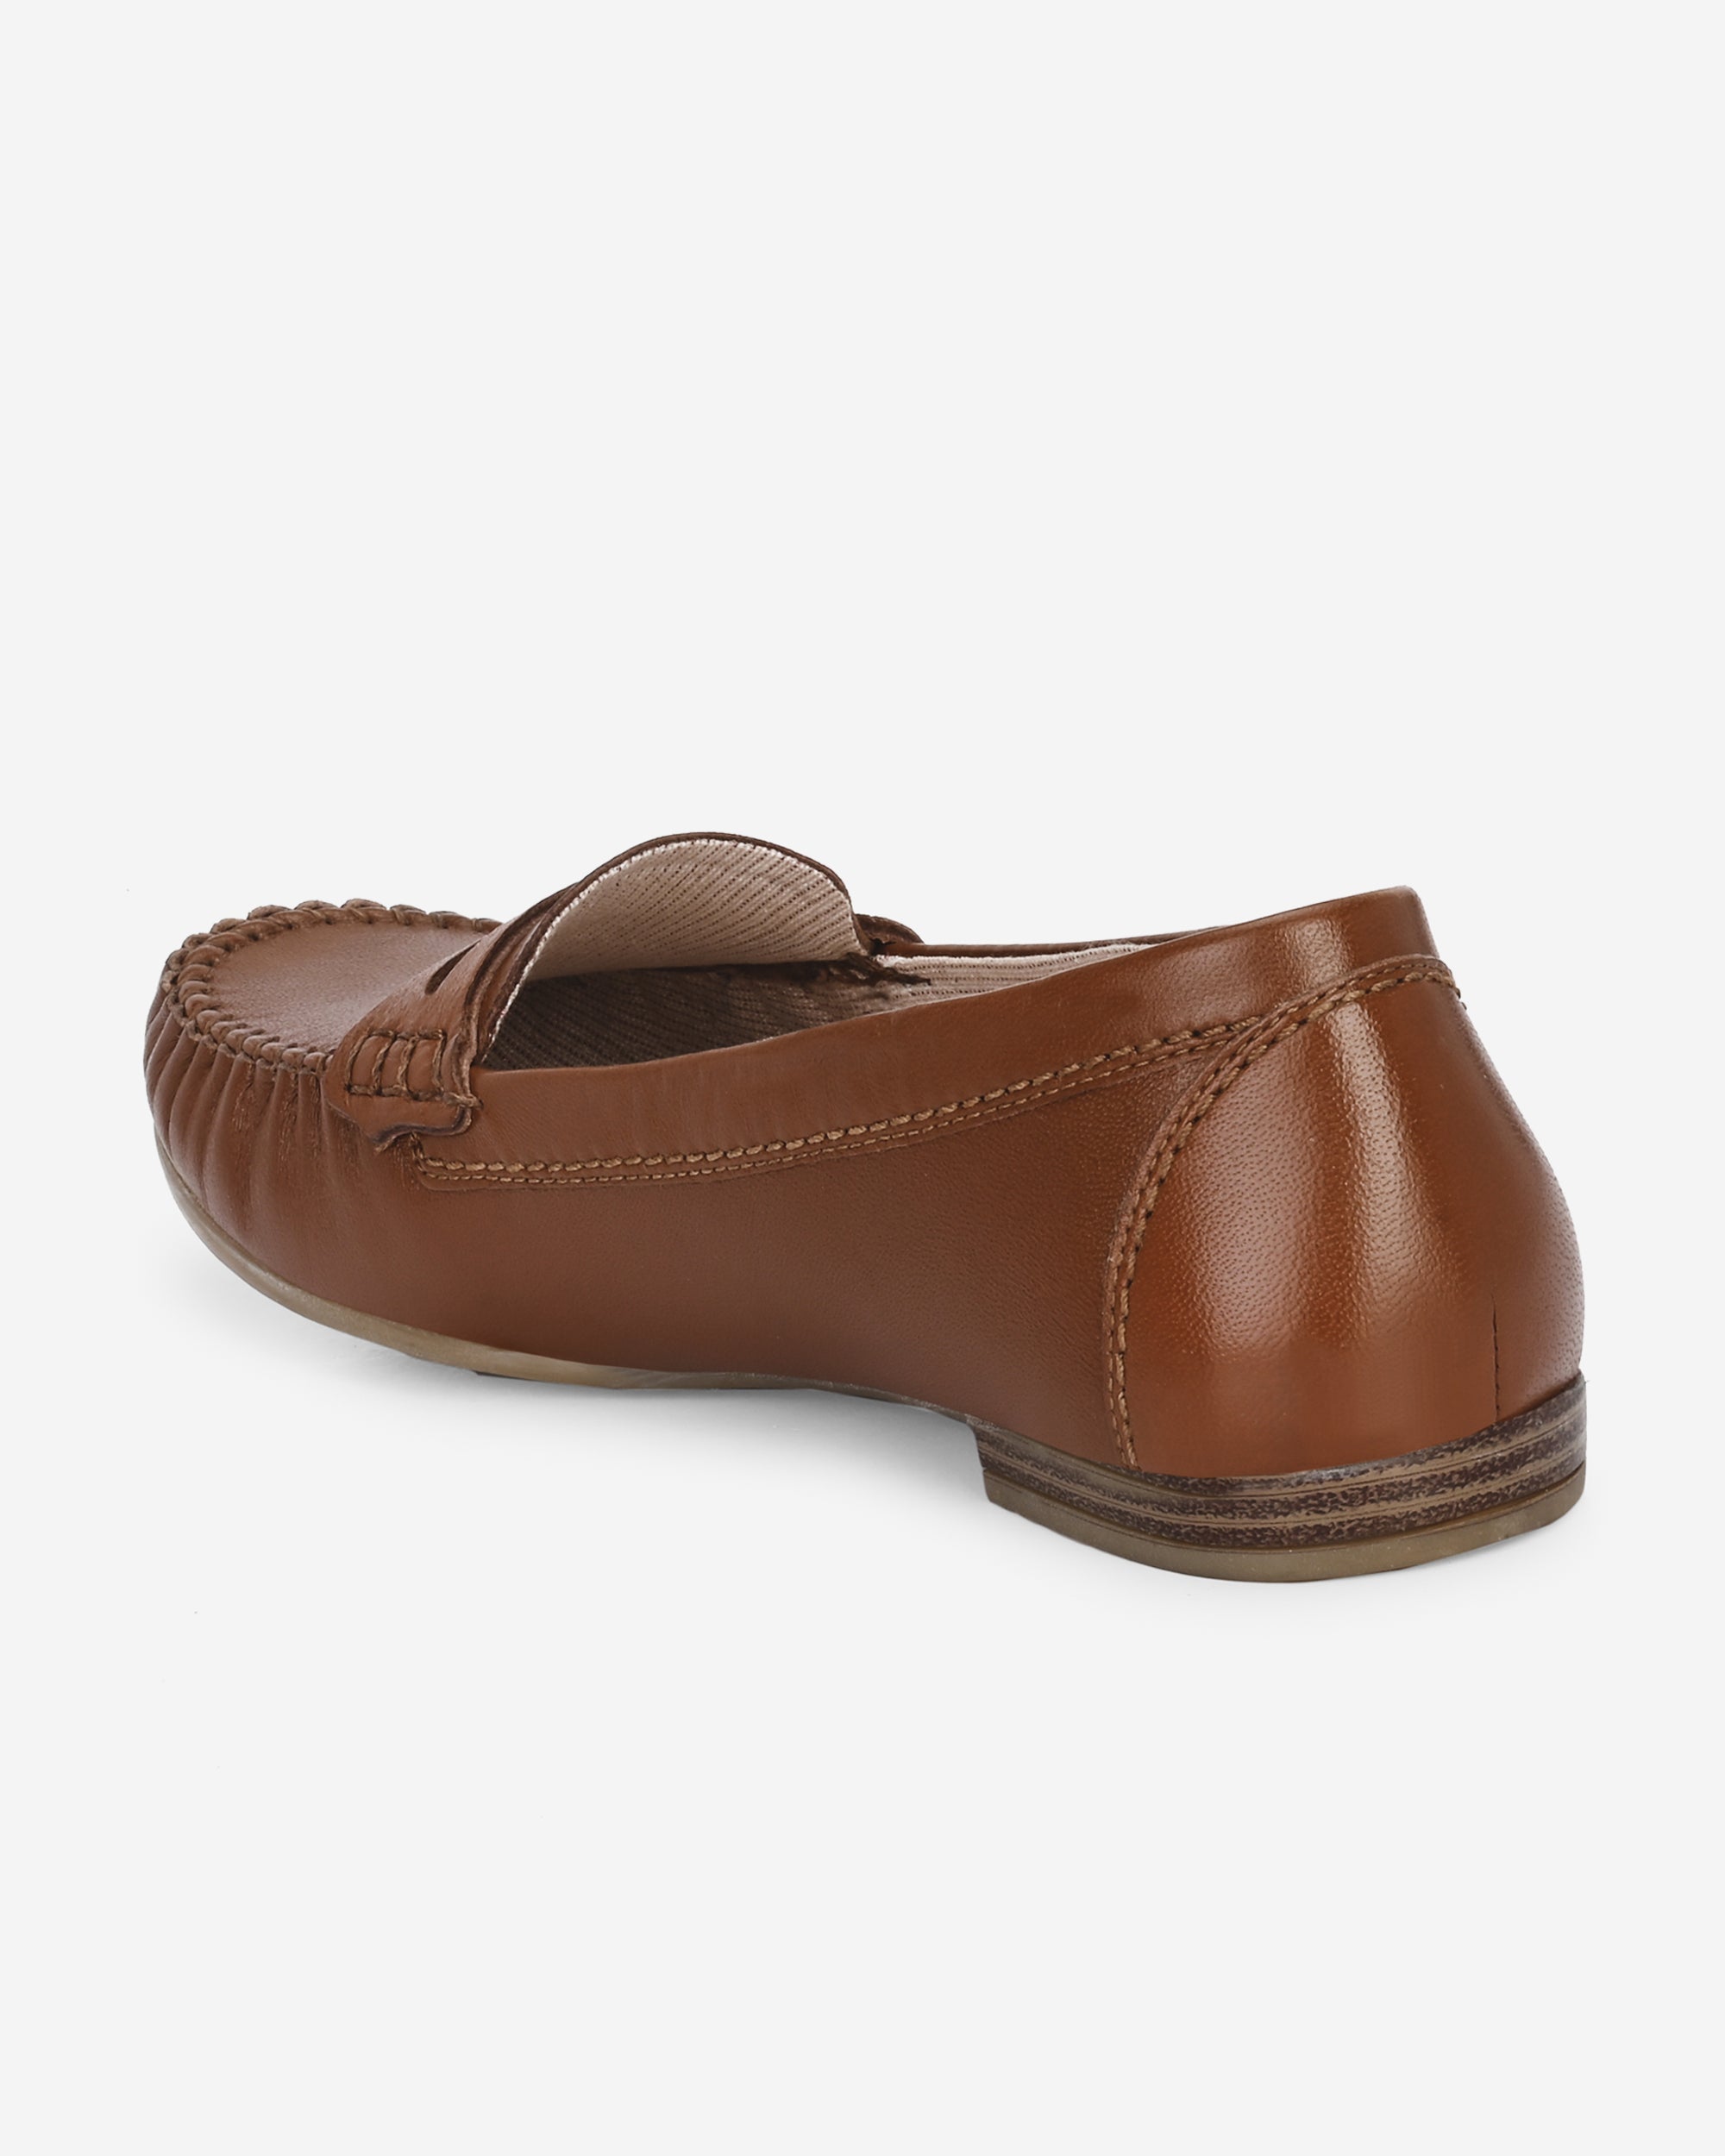 AUDREY BROWN MOCCASIN